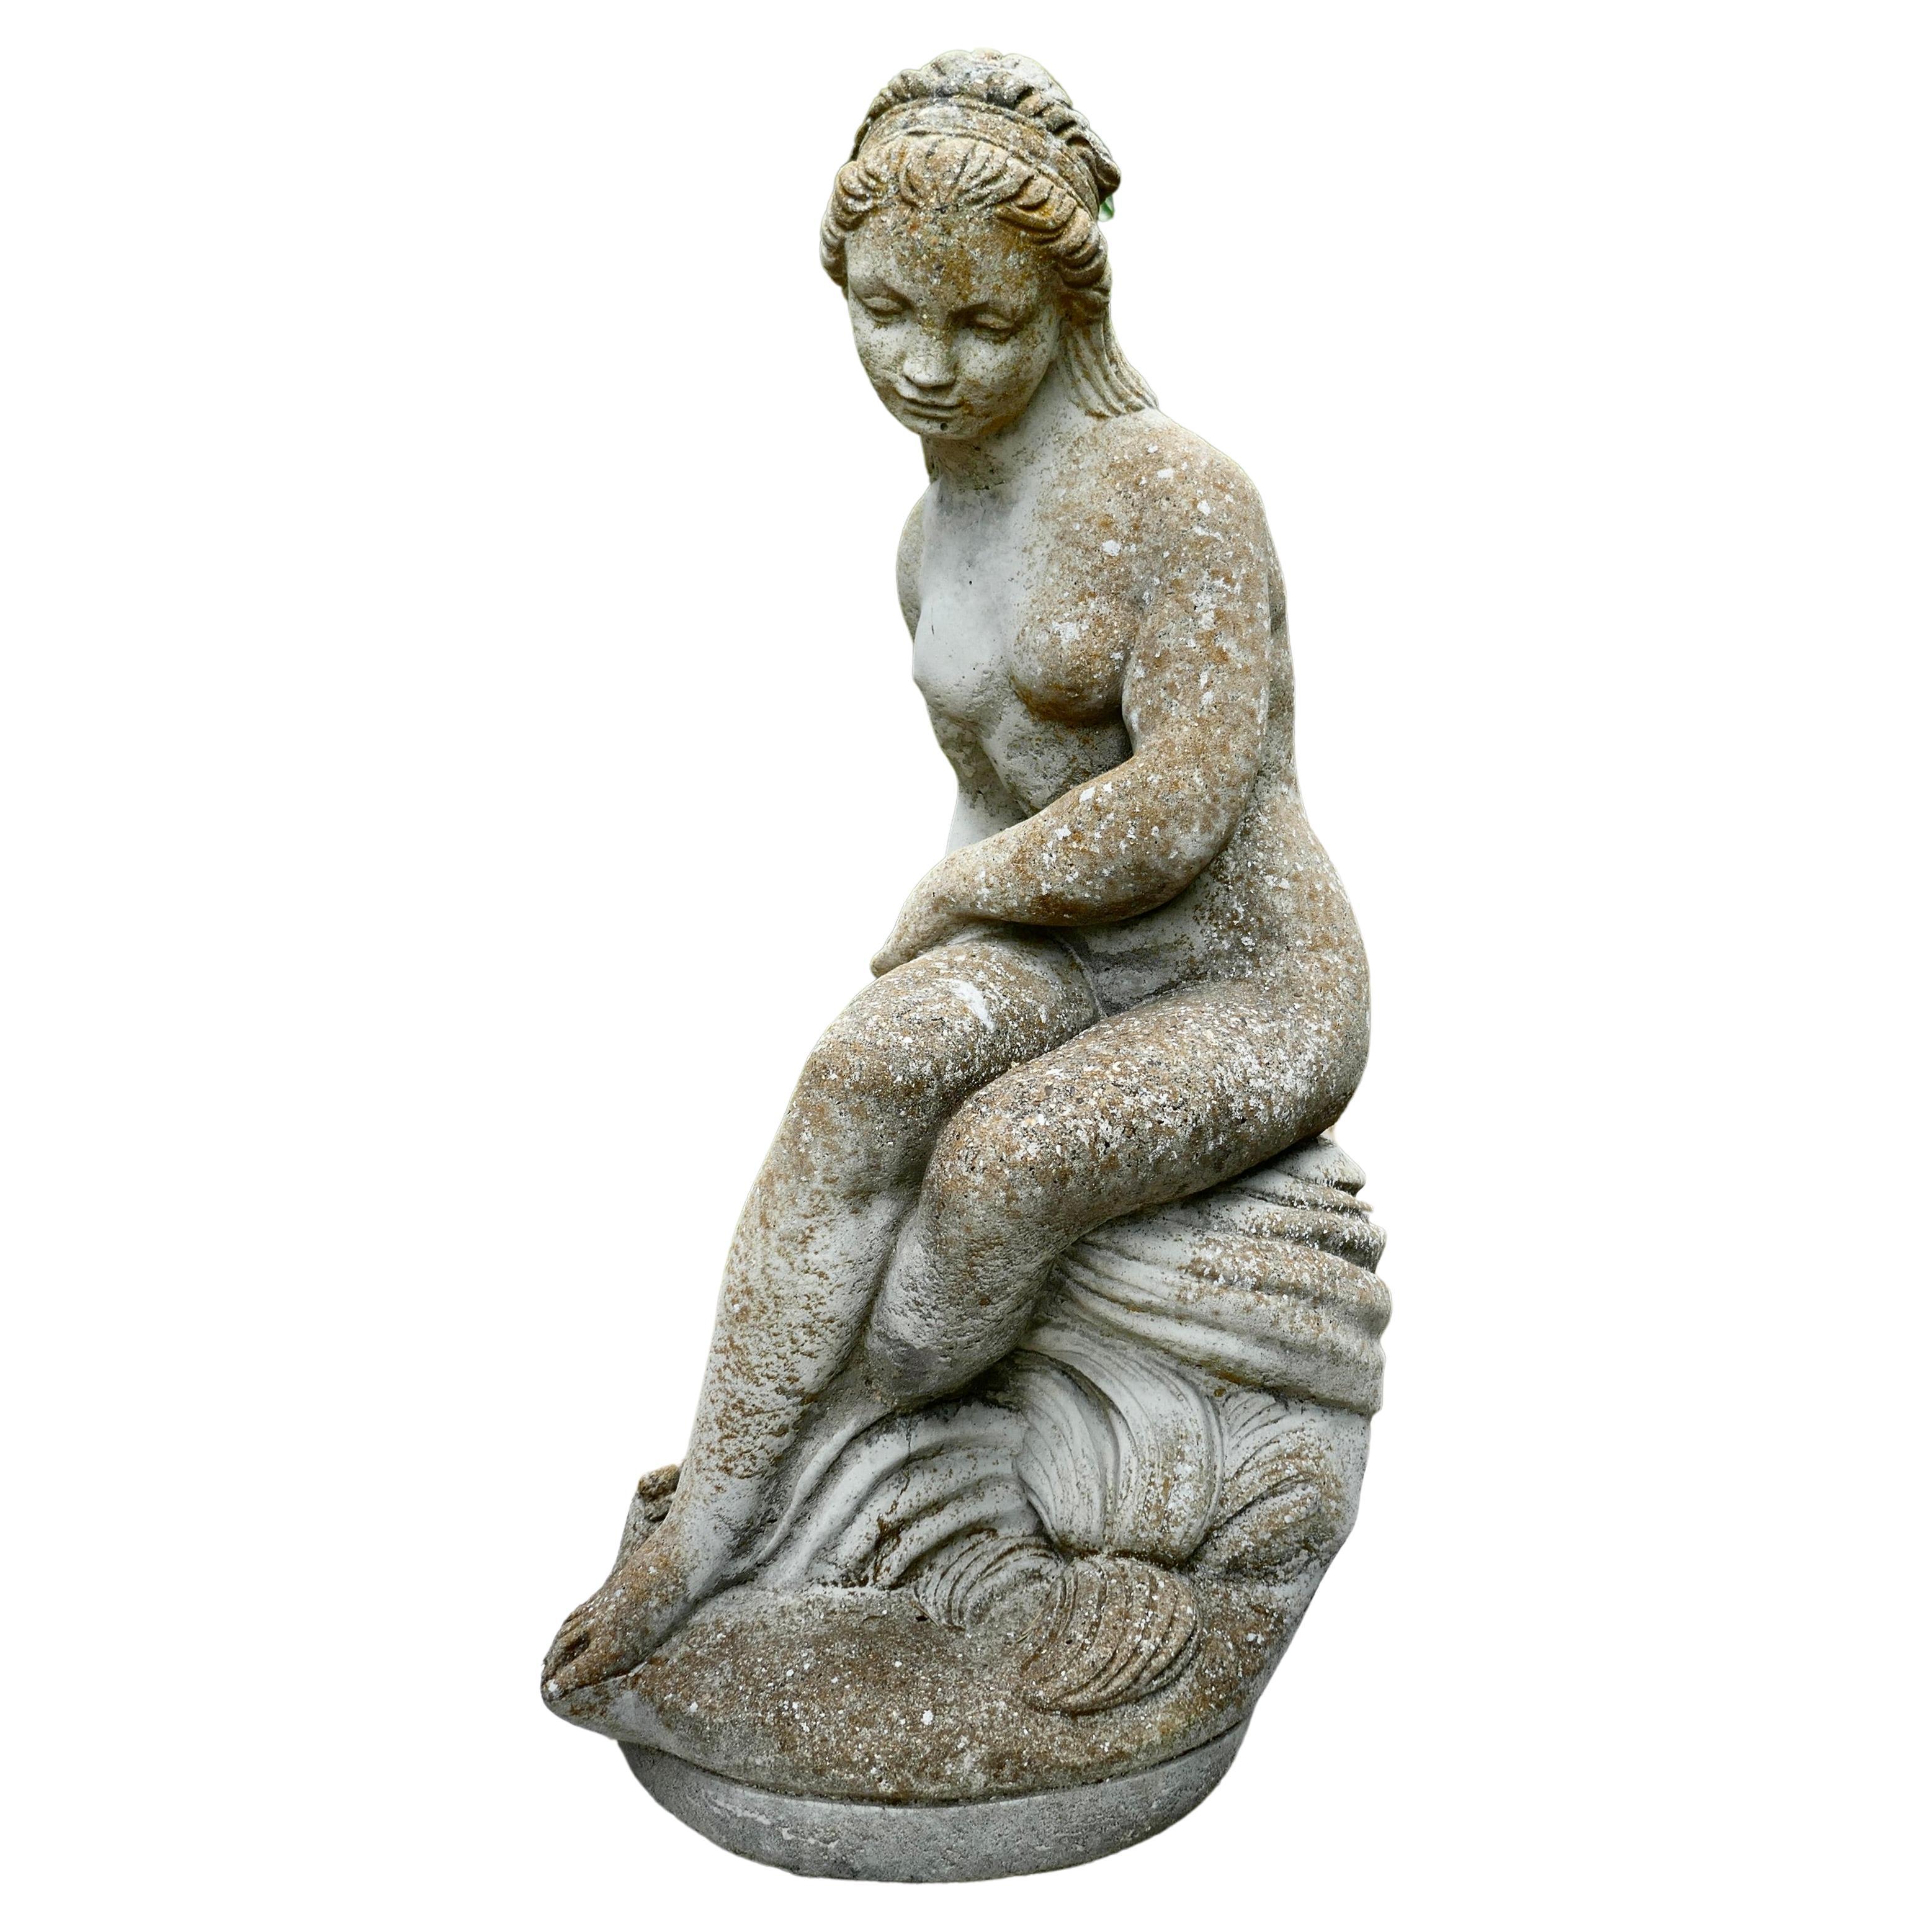 Old Weathered Statue of the Goddess Tyche Holding a Snake